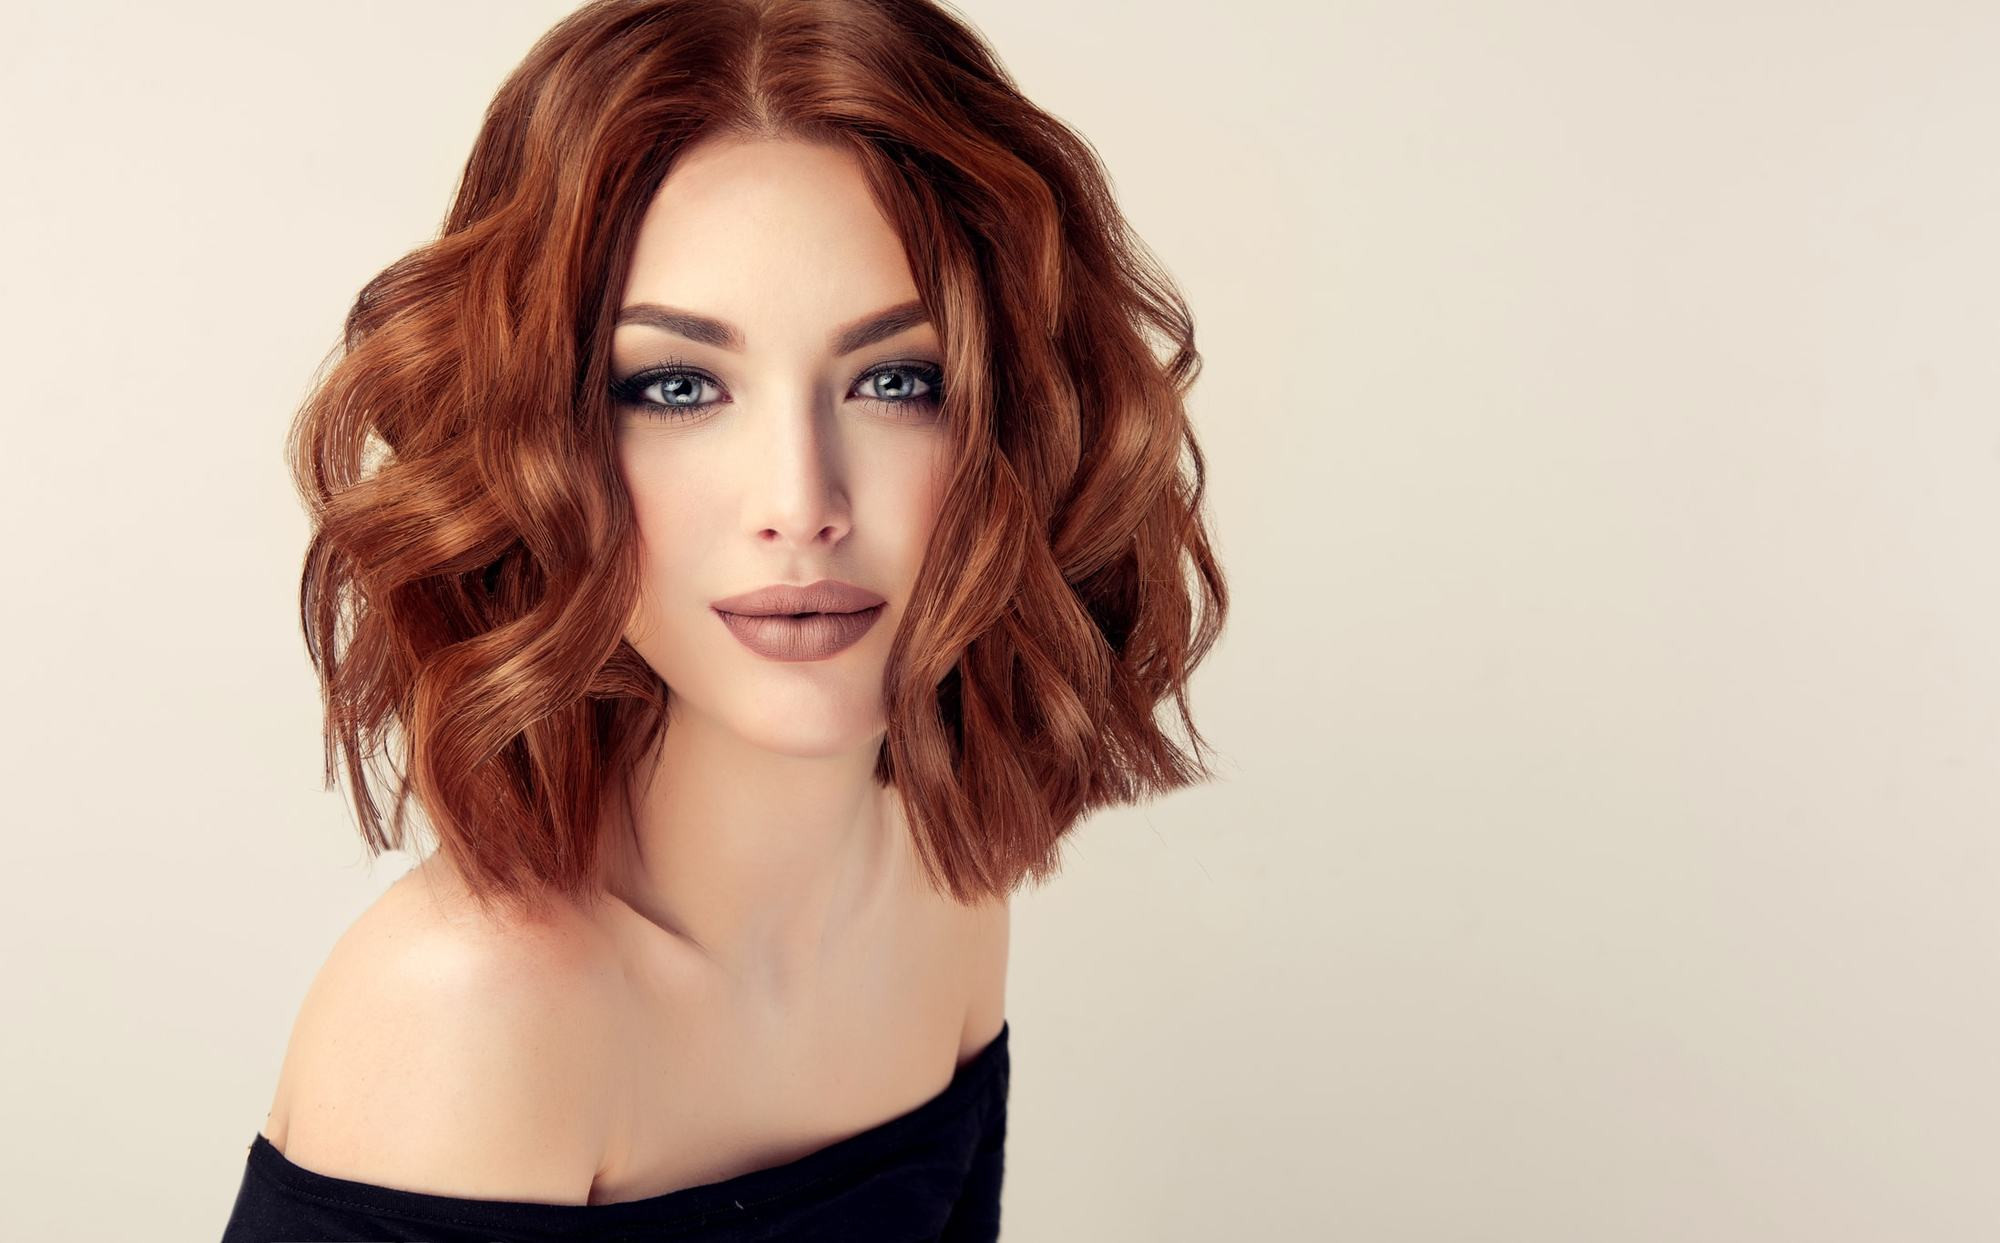 Blunt Cut Bob For Thick Hair
 The Best Haircut for Thick Hair Has These Key Qualities